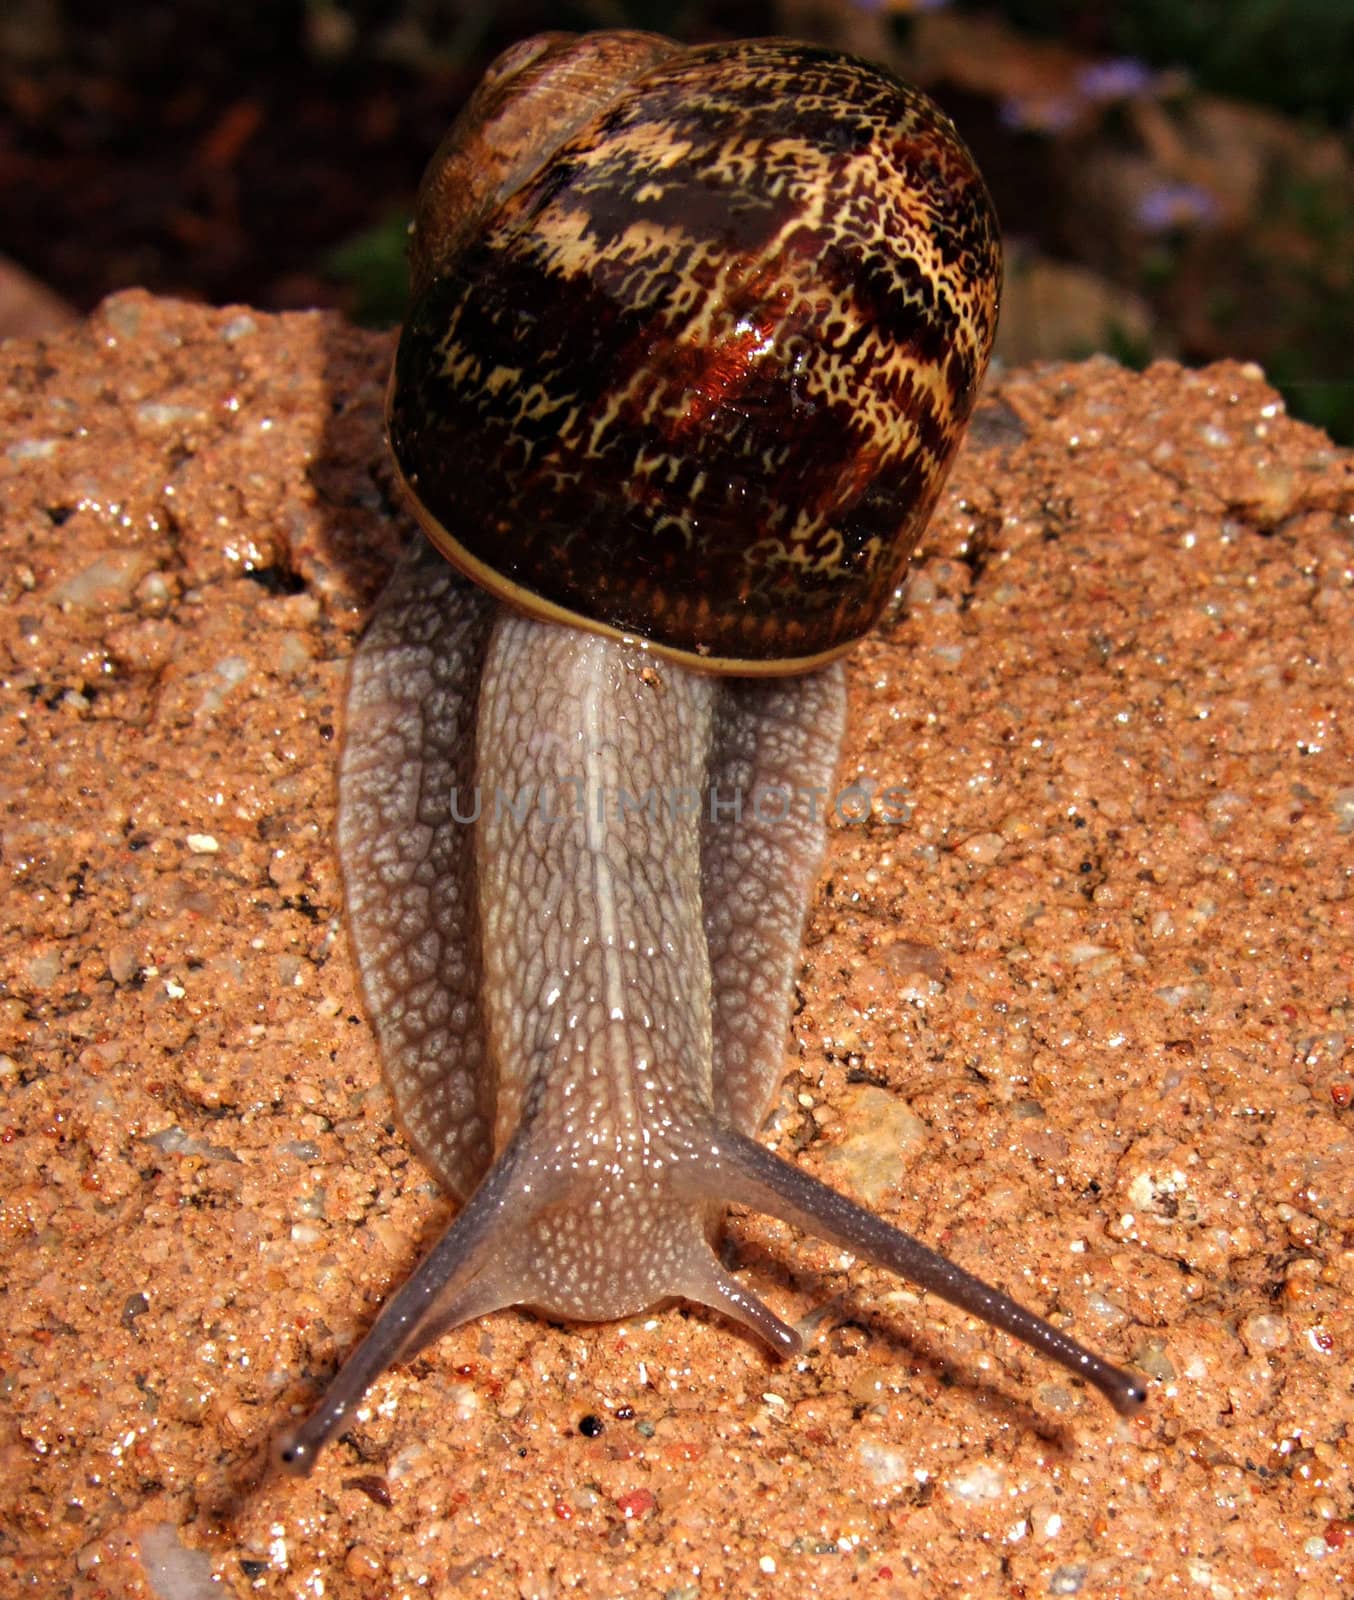 A wet snail on the ground fully extended from its shell